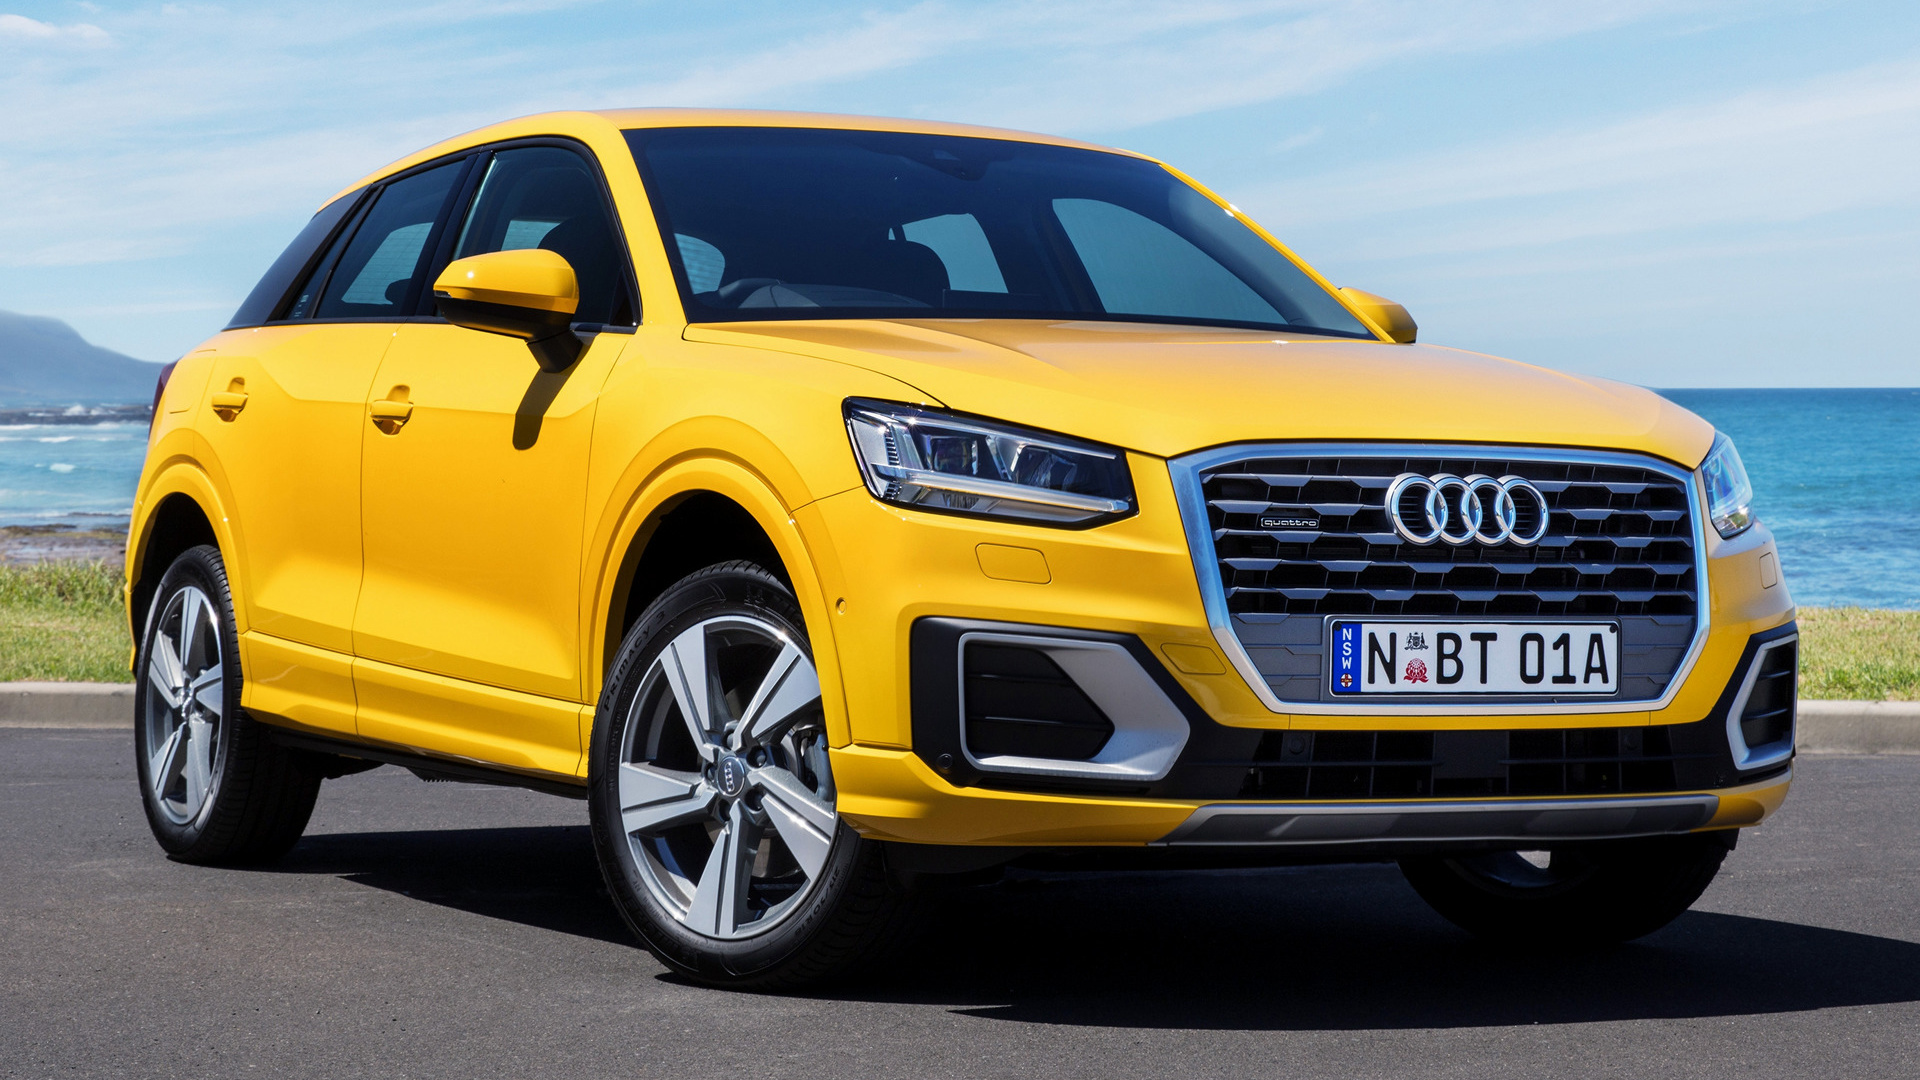 Download mobile wallpaper Audi, Car, Suv, Vehicles, Yellow Car, Crossover Car, Subcompact Car, Audi Q2 Tdi for free.